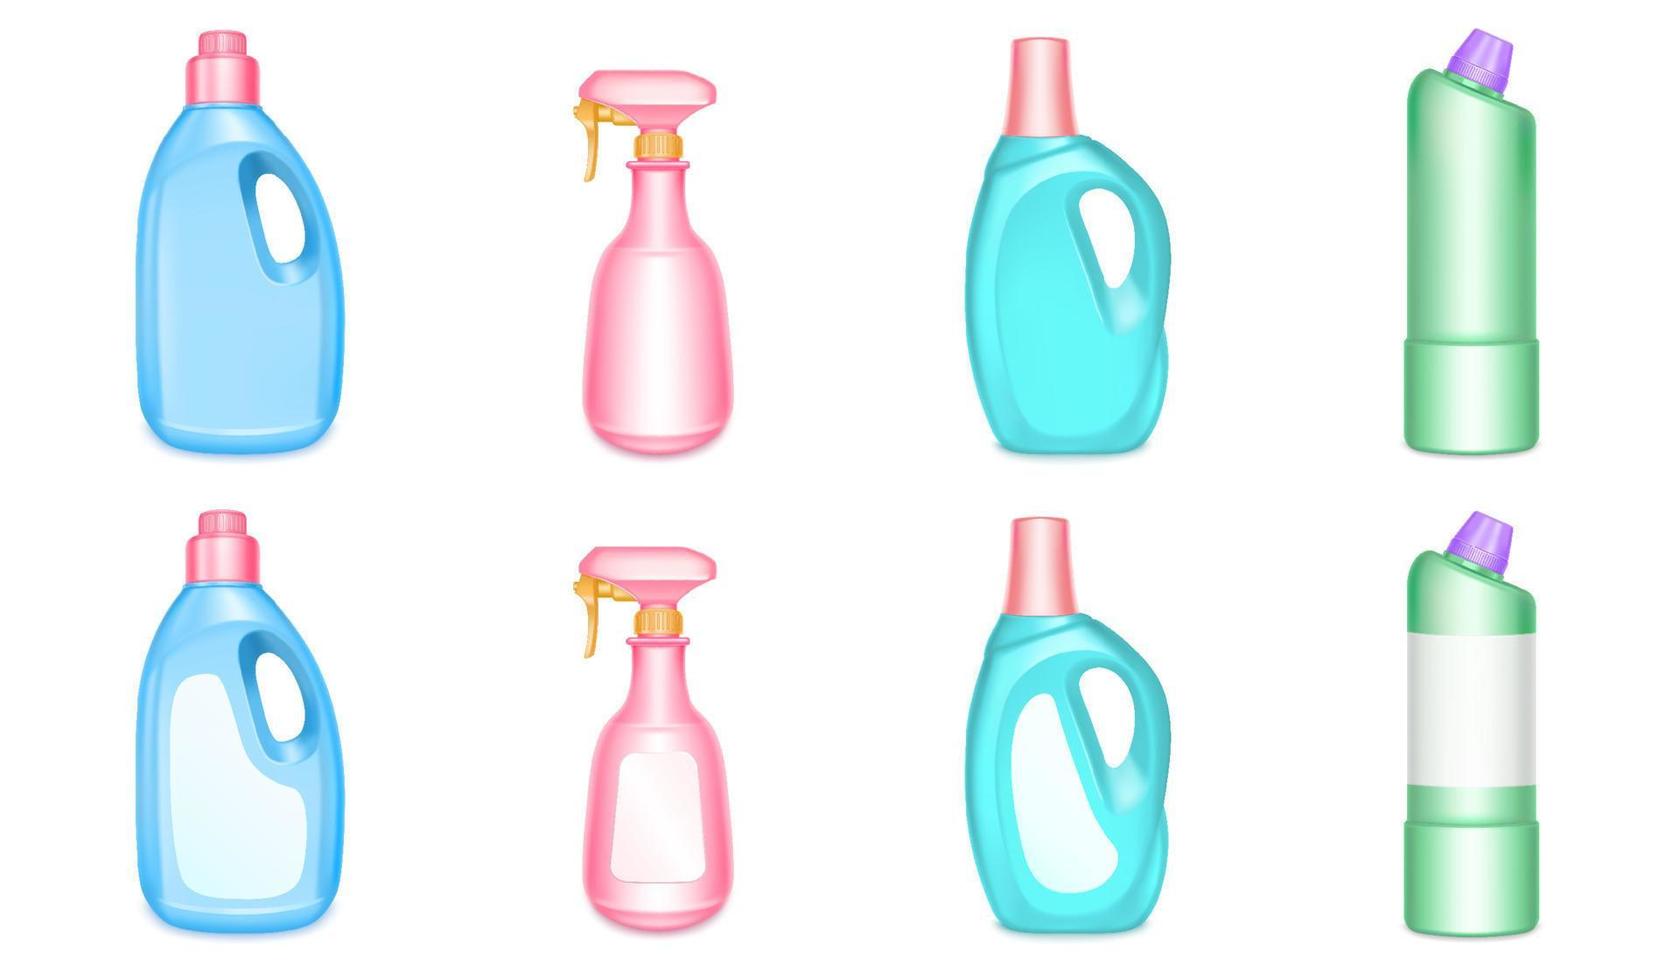 Plastic bottles for household chemicals, cleaners vector